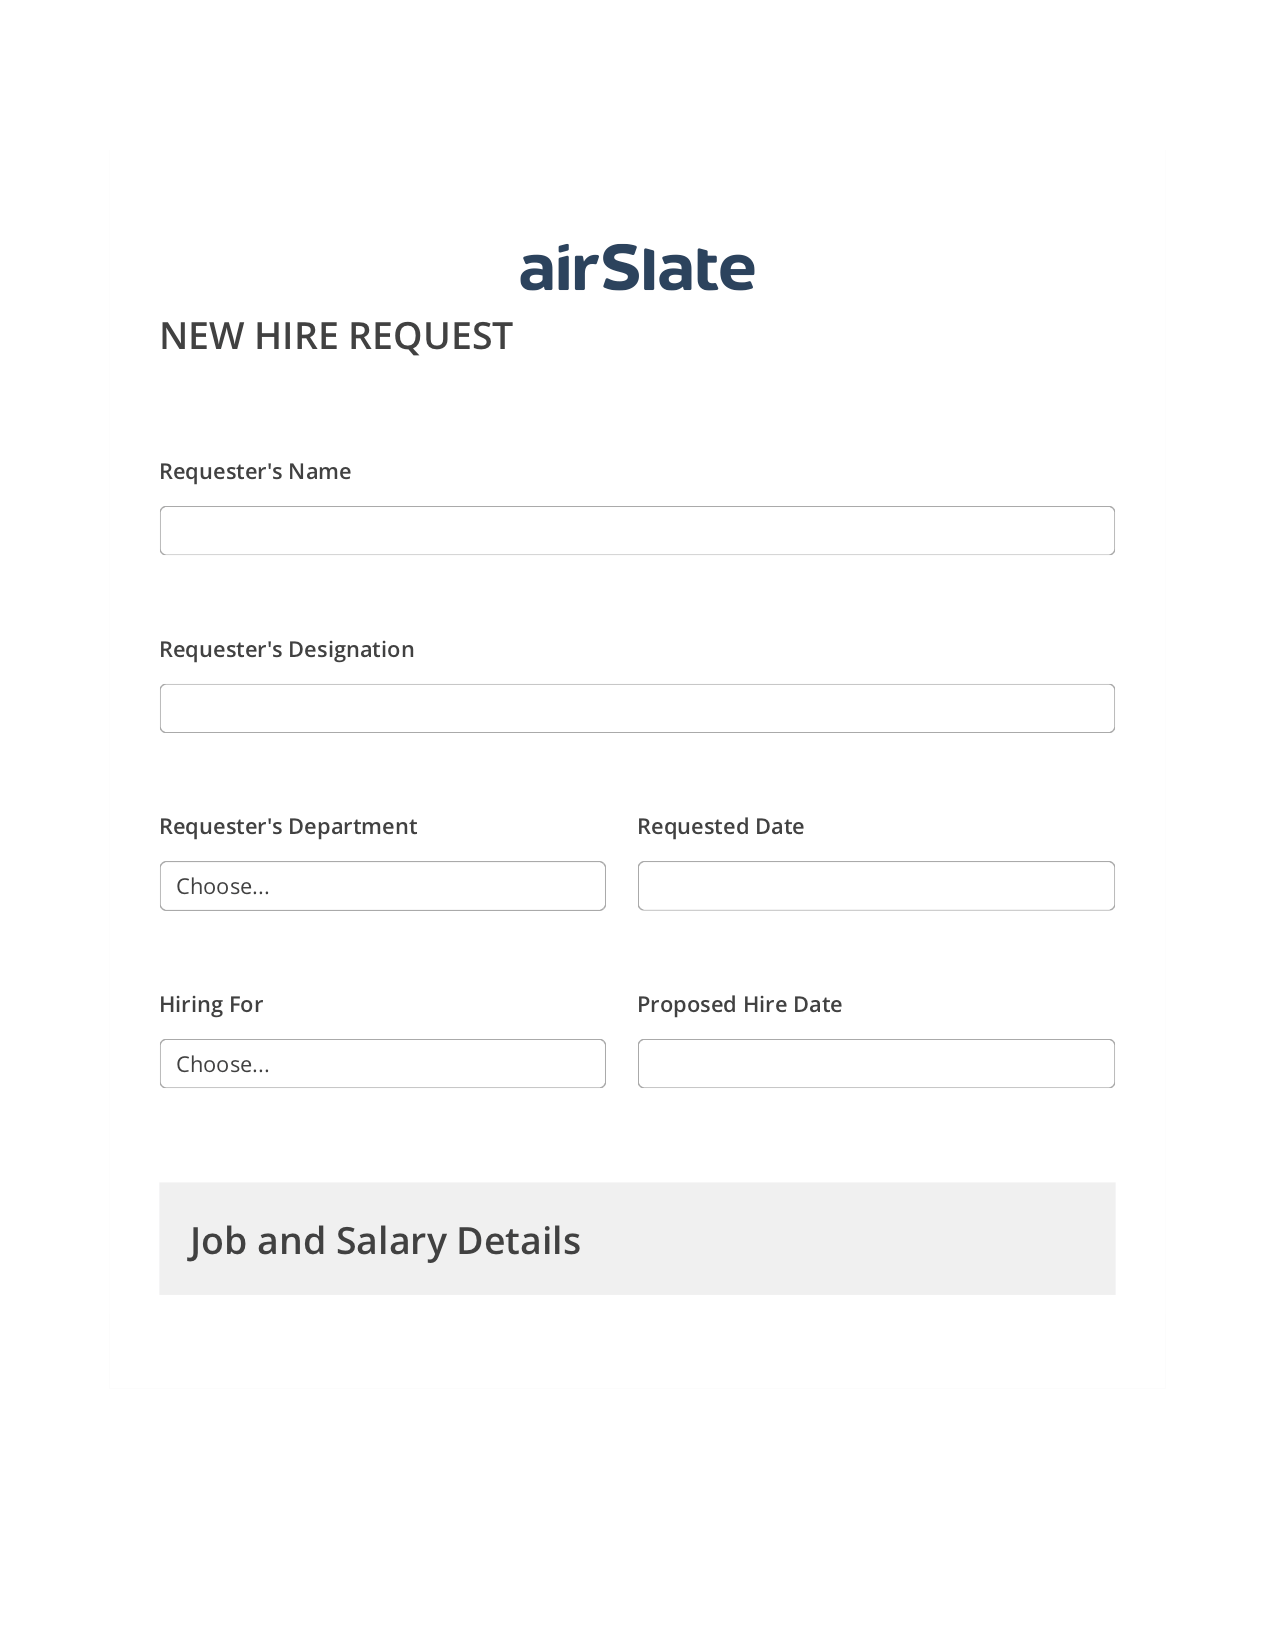 Multirole Hiring Request Workflow Pre-fill from Google Sheets Bot, Remove Tags From Slate Bot, Archive to Box Bot